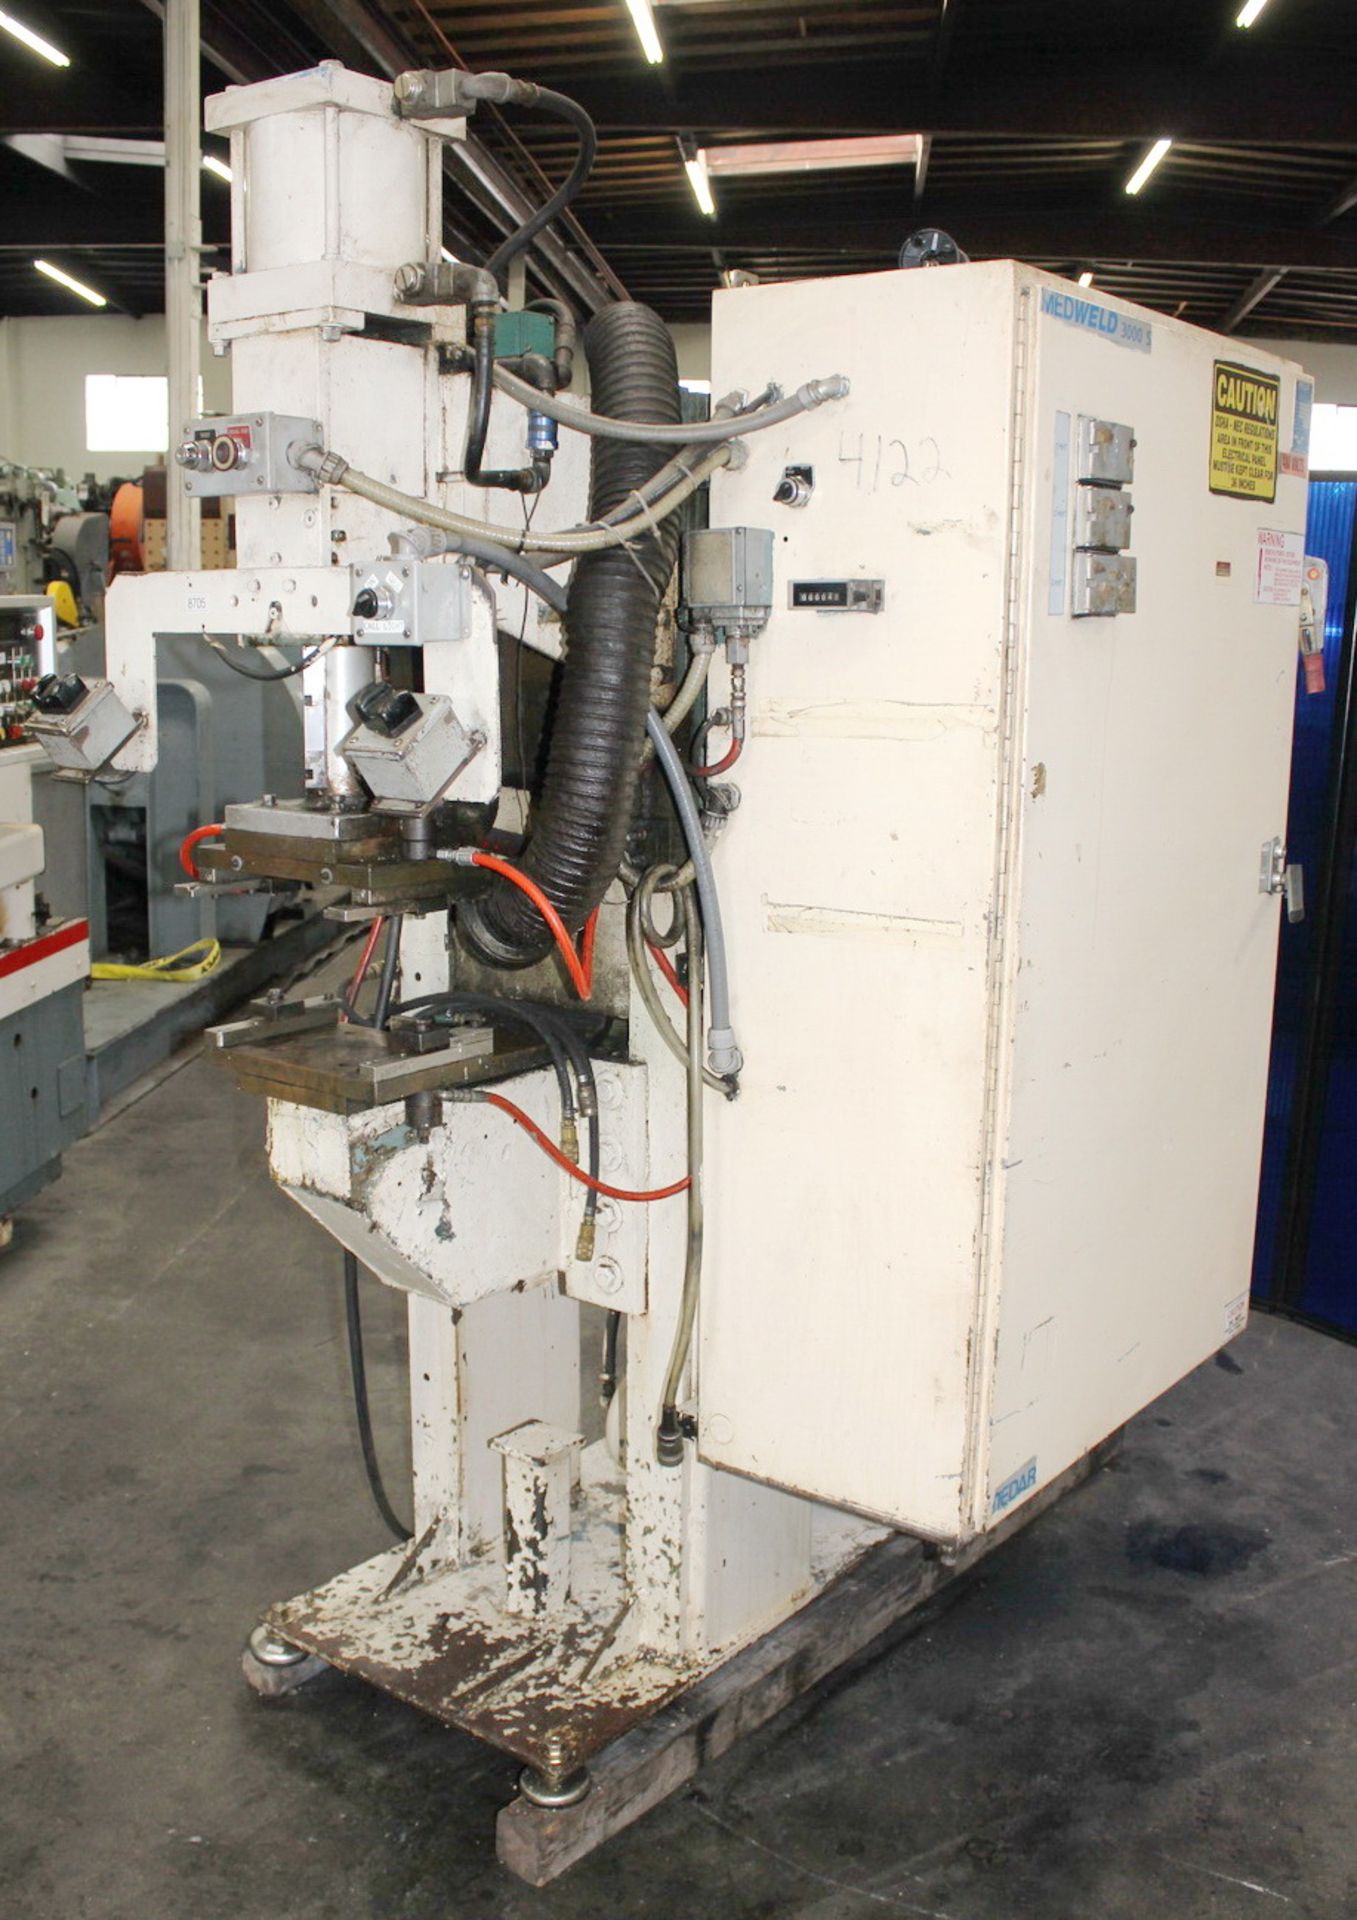 Hoffman Press Type Spot Welder 125 KVA x 14''. LOADING FEE FOR THIS LOT: $150 - Image 3 of 18